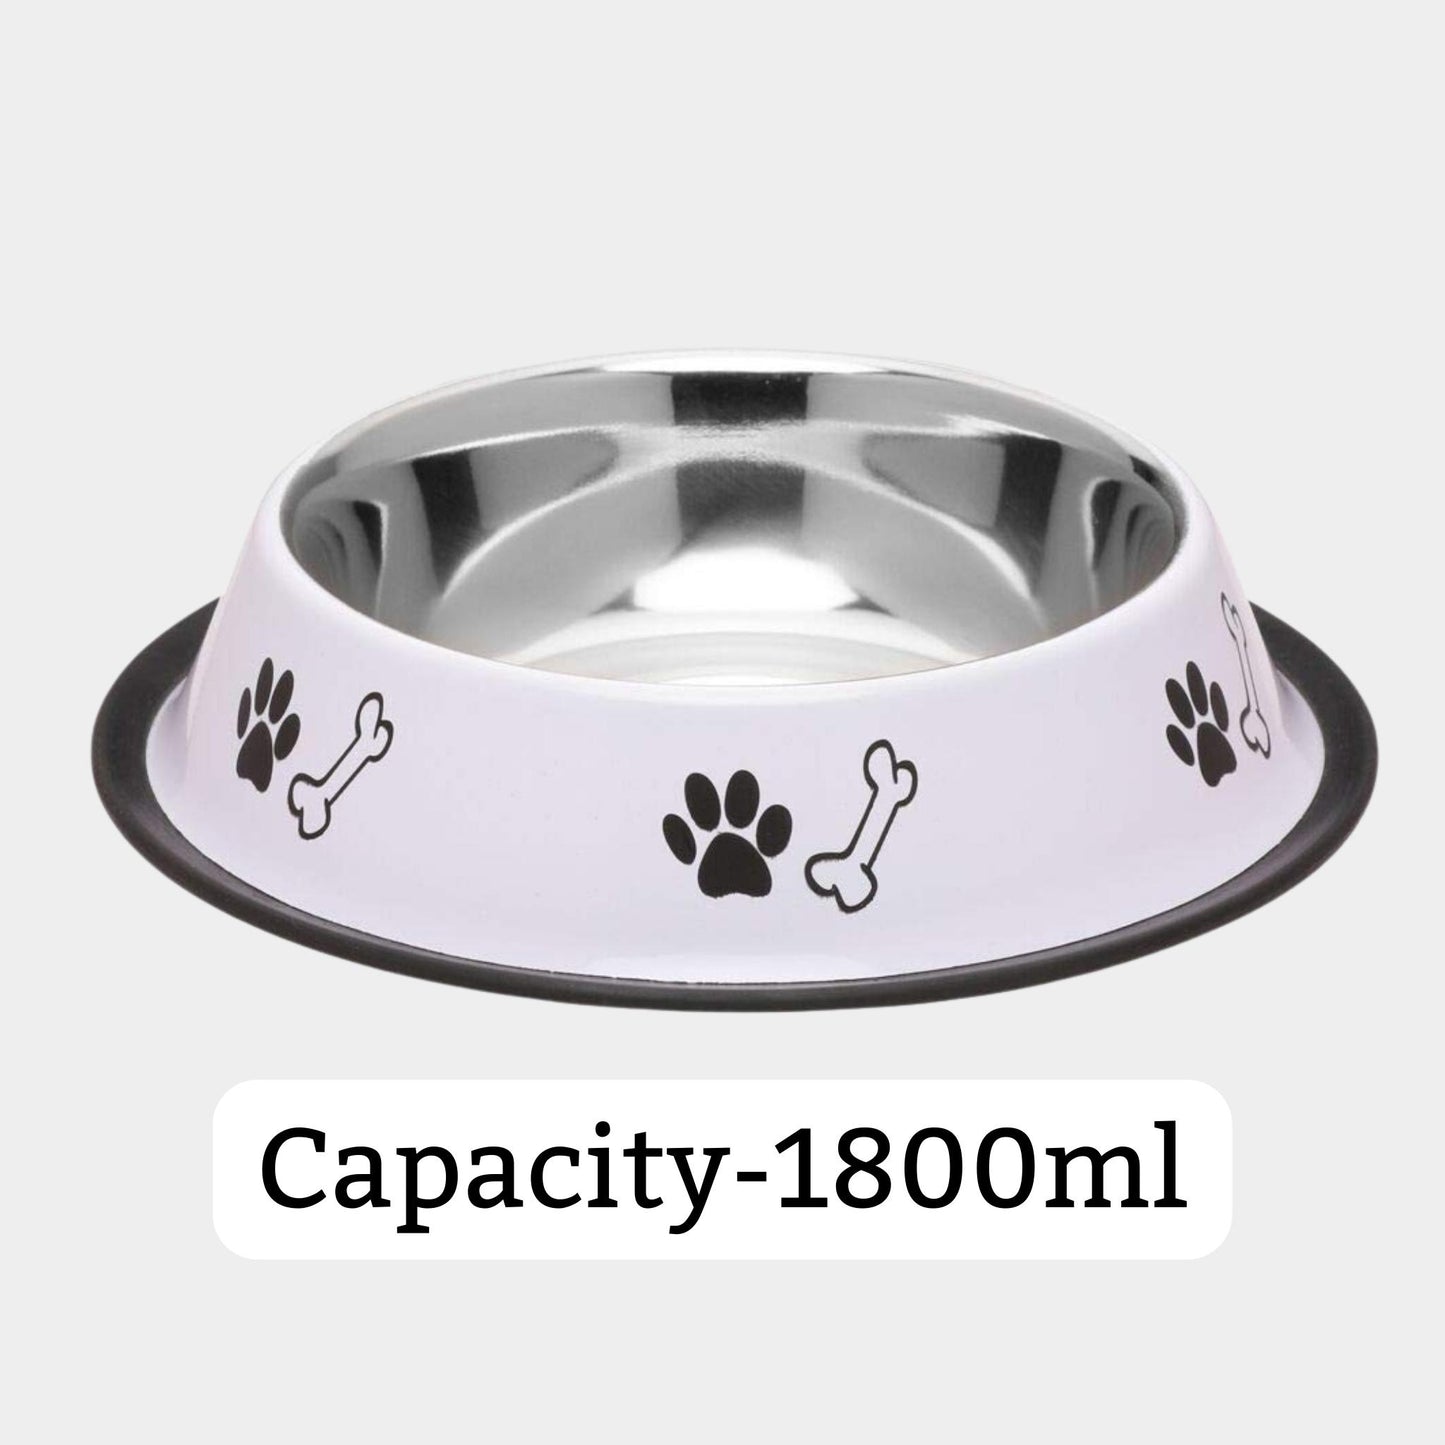 Foodie Puppies Printed Steel Bowl for Pets - 1800ml (White), Pack of 2